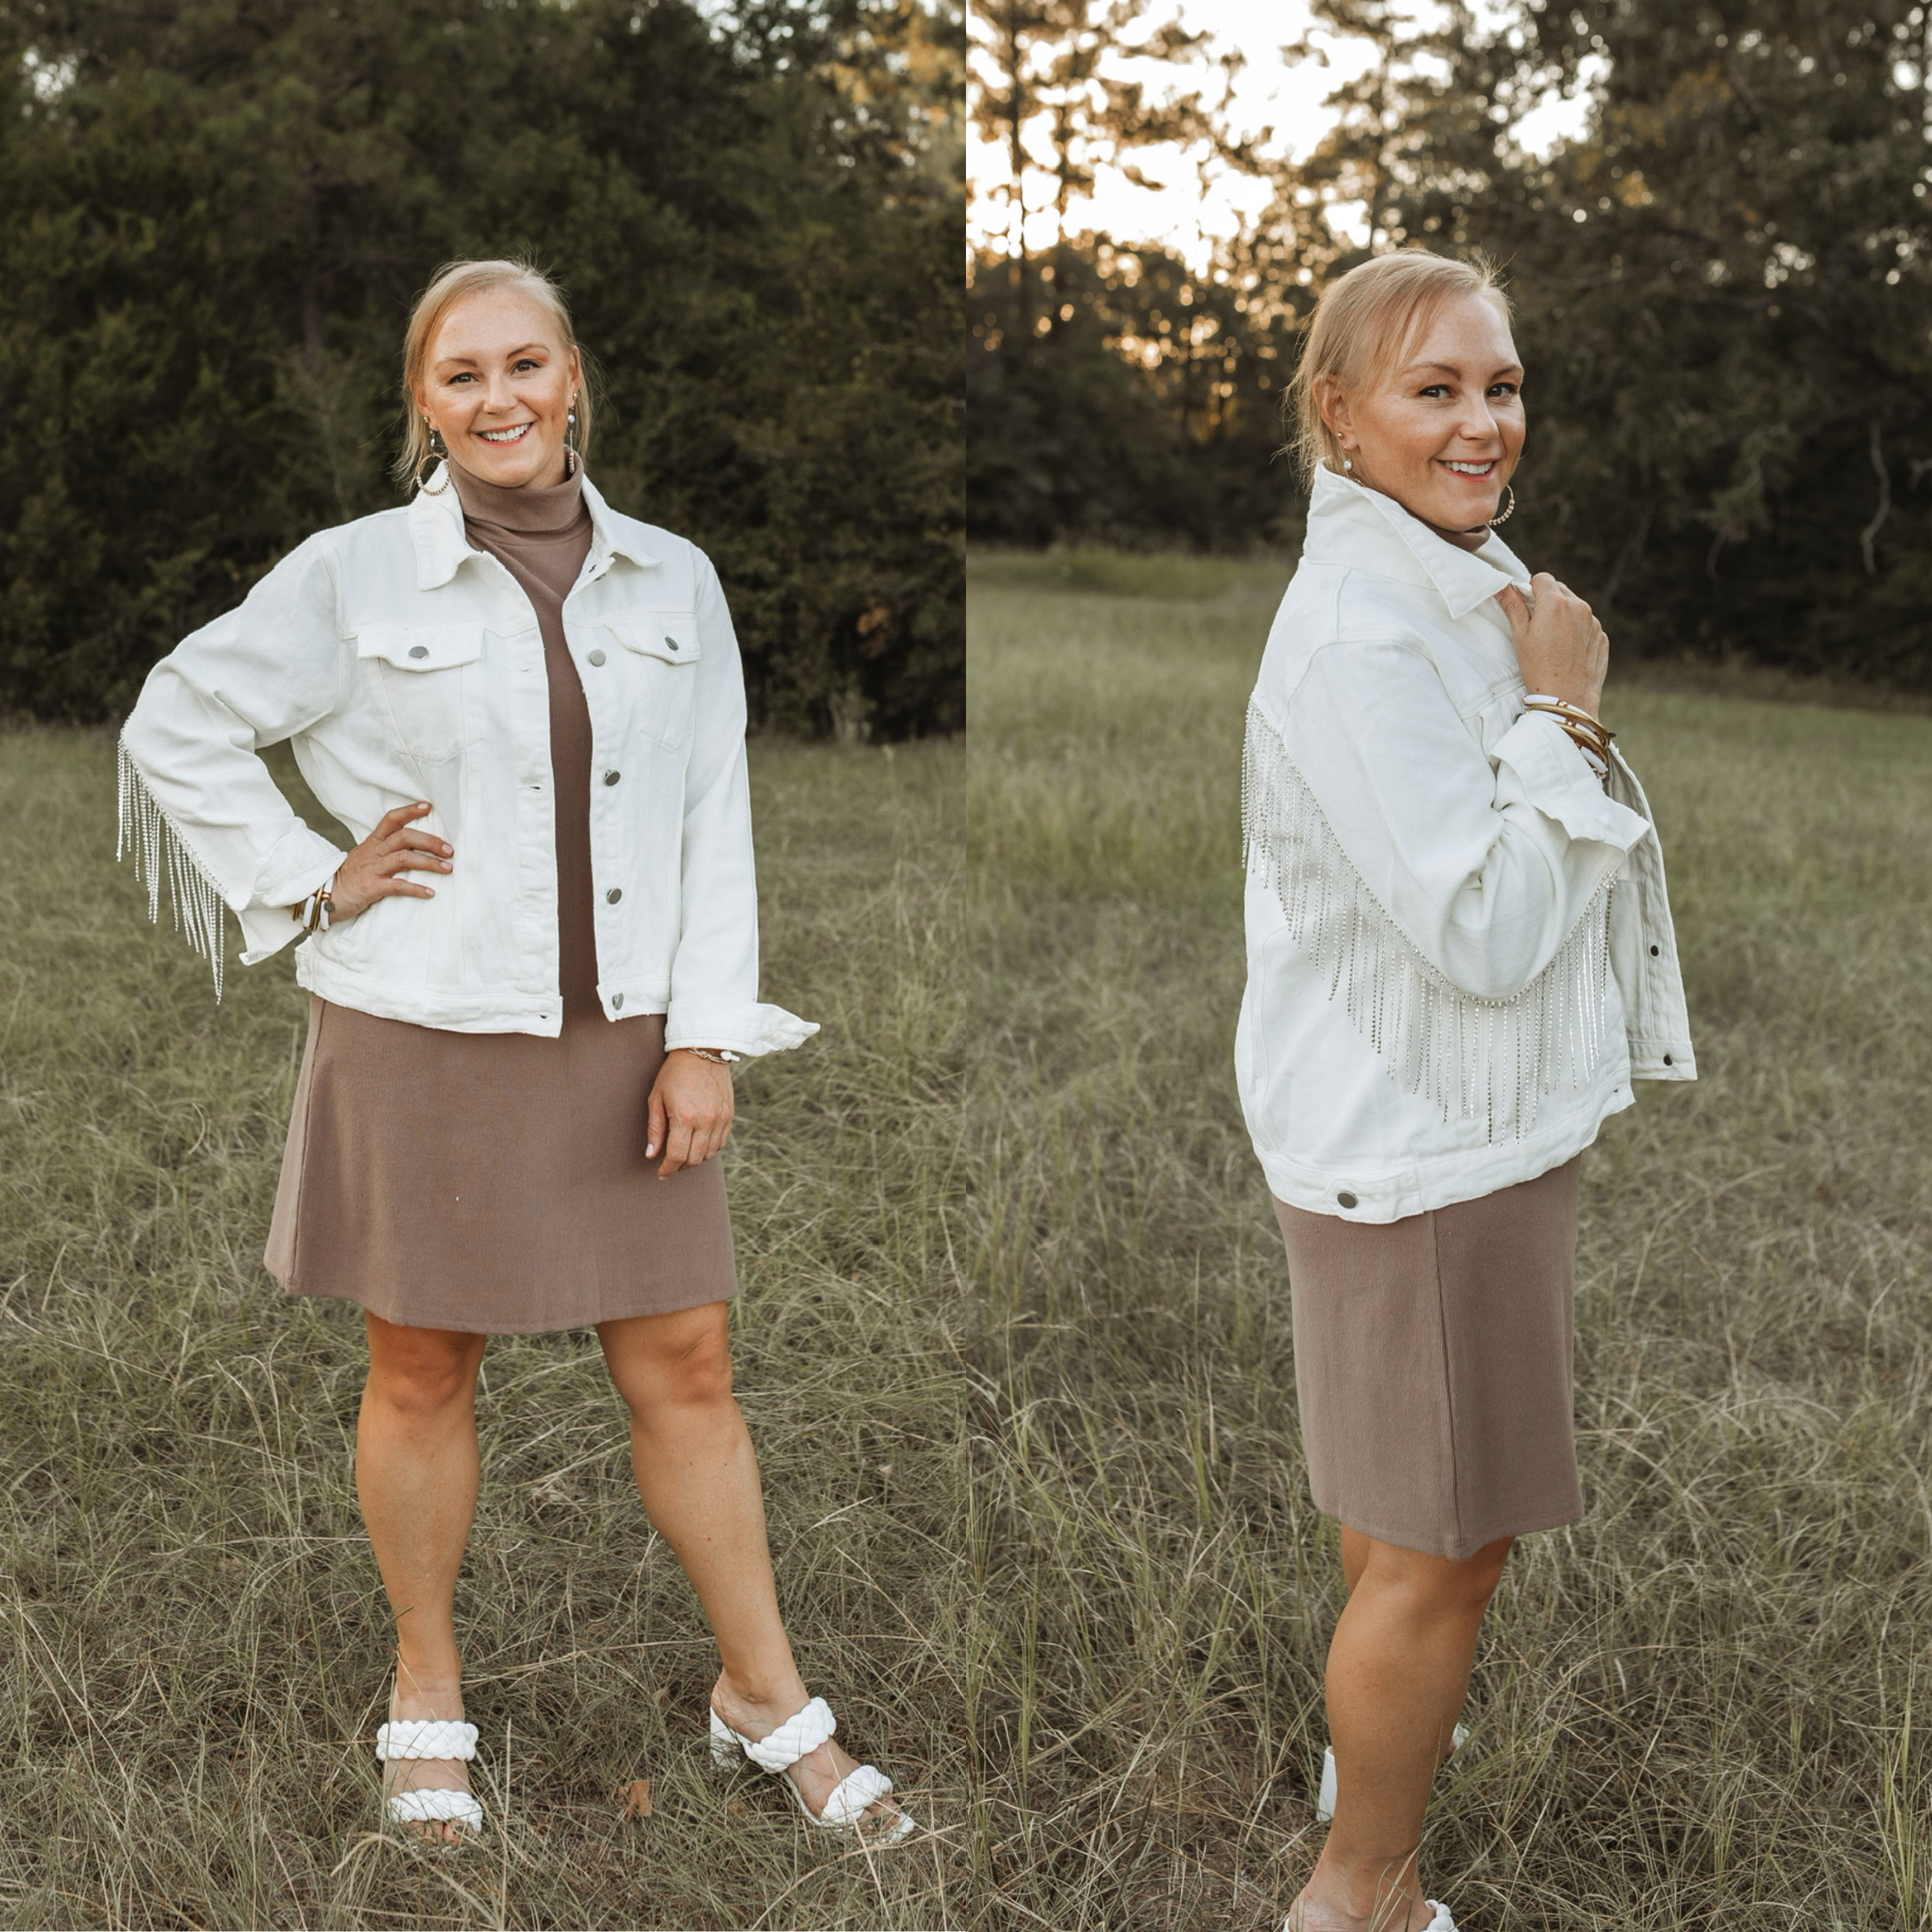 Mallory is pictured here modeling our new white denim jacket with a collared neckline, button up front, and front pockets that button. The jacket features a line of crystal fringe across the back of the arms and the back of the jacket. Mallory is modeling this jacket with our "One Love" tank sweater dress with turtle neck in taupe underneath along with gold jewelry and white, braided heels. 